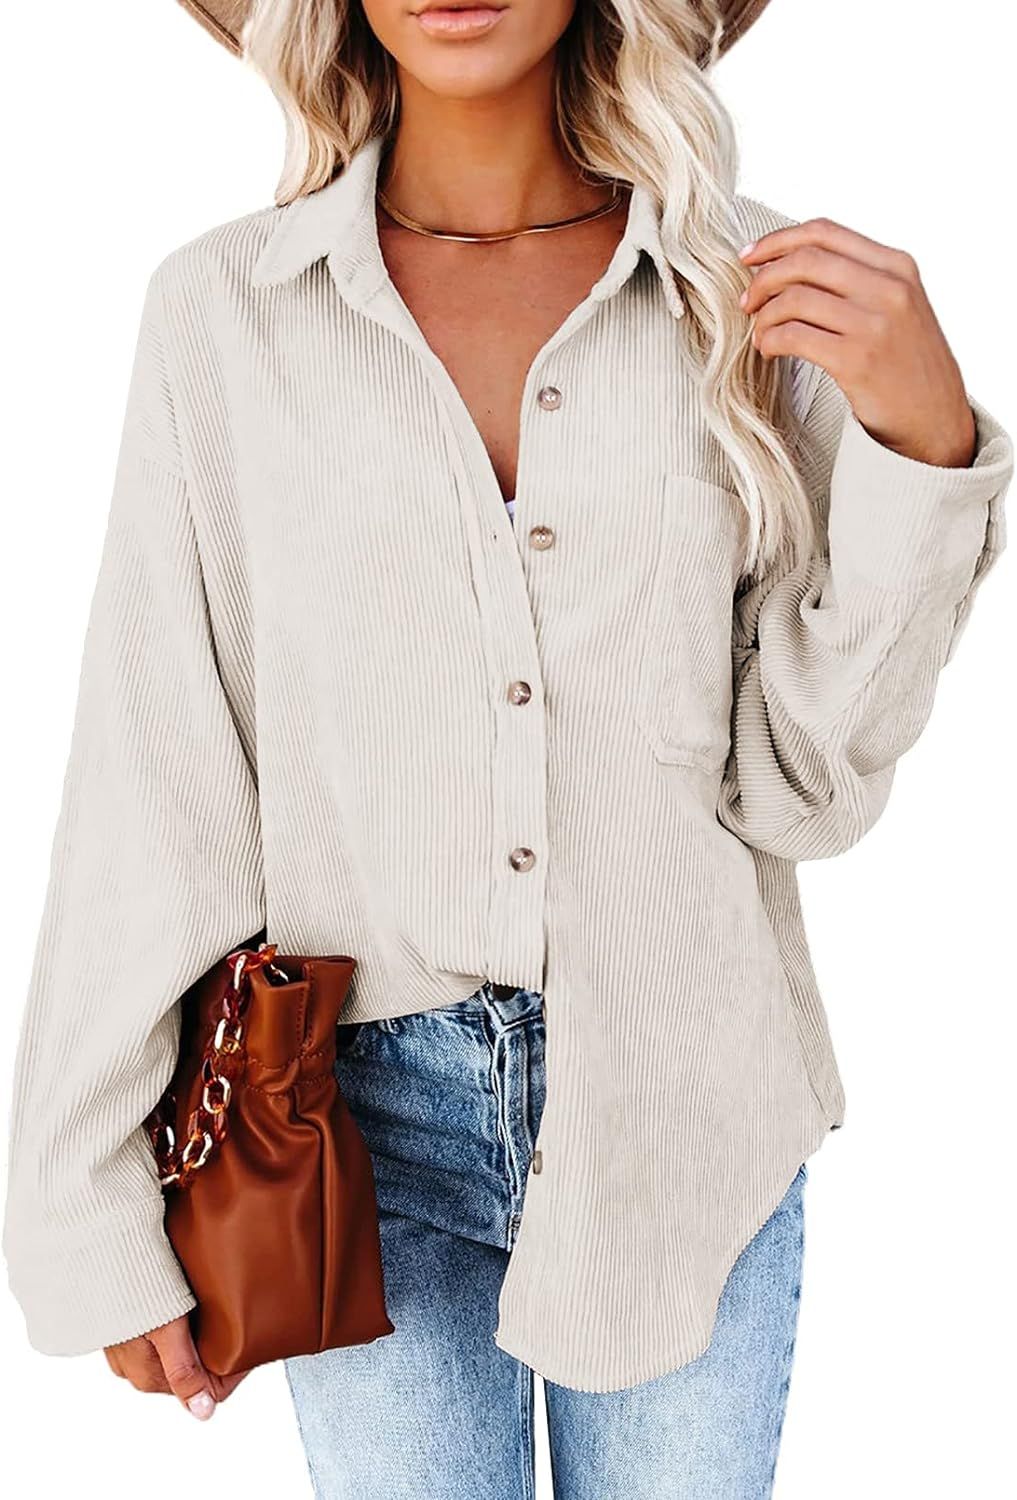 Astylish Women Corduroy Shirts Casual Long Sleeve Button Down Blouses Top       Add to Logie | Amazon (US)